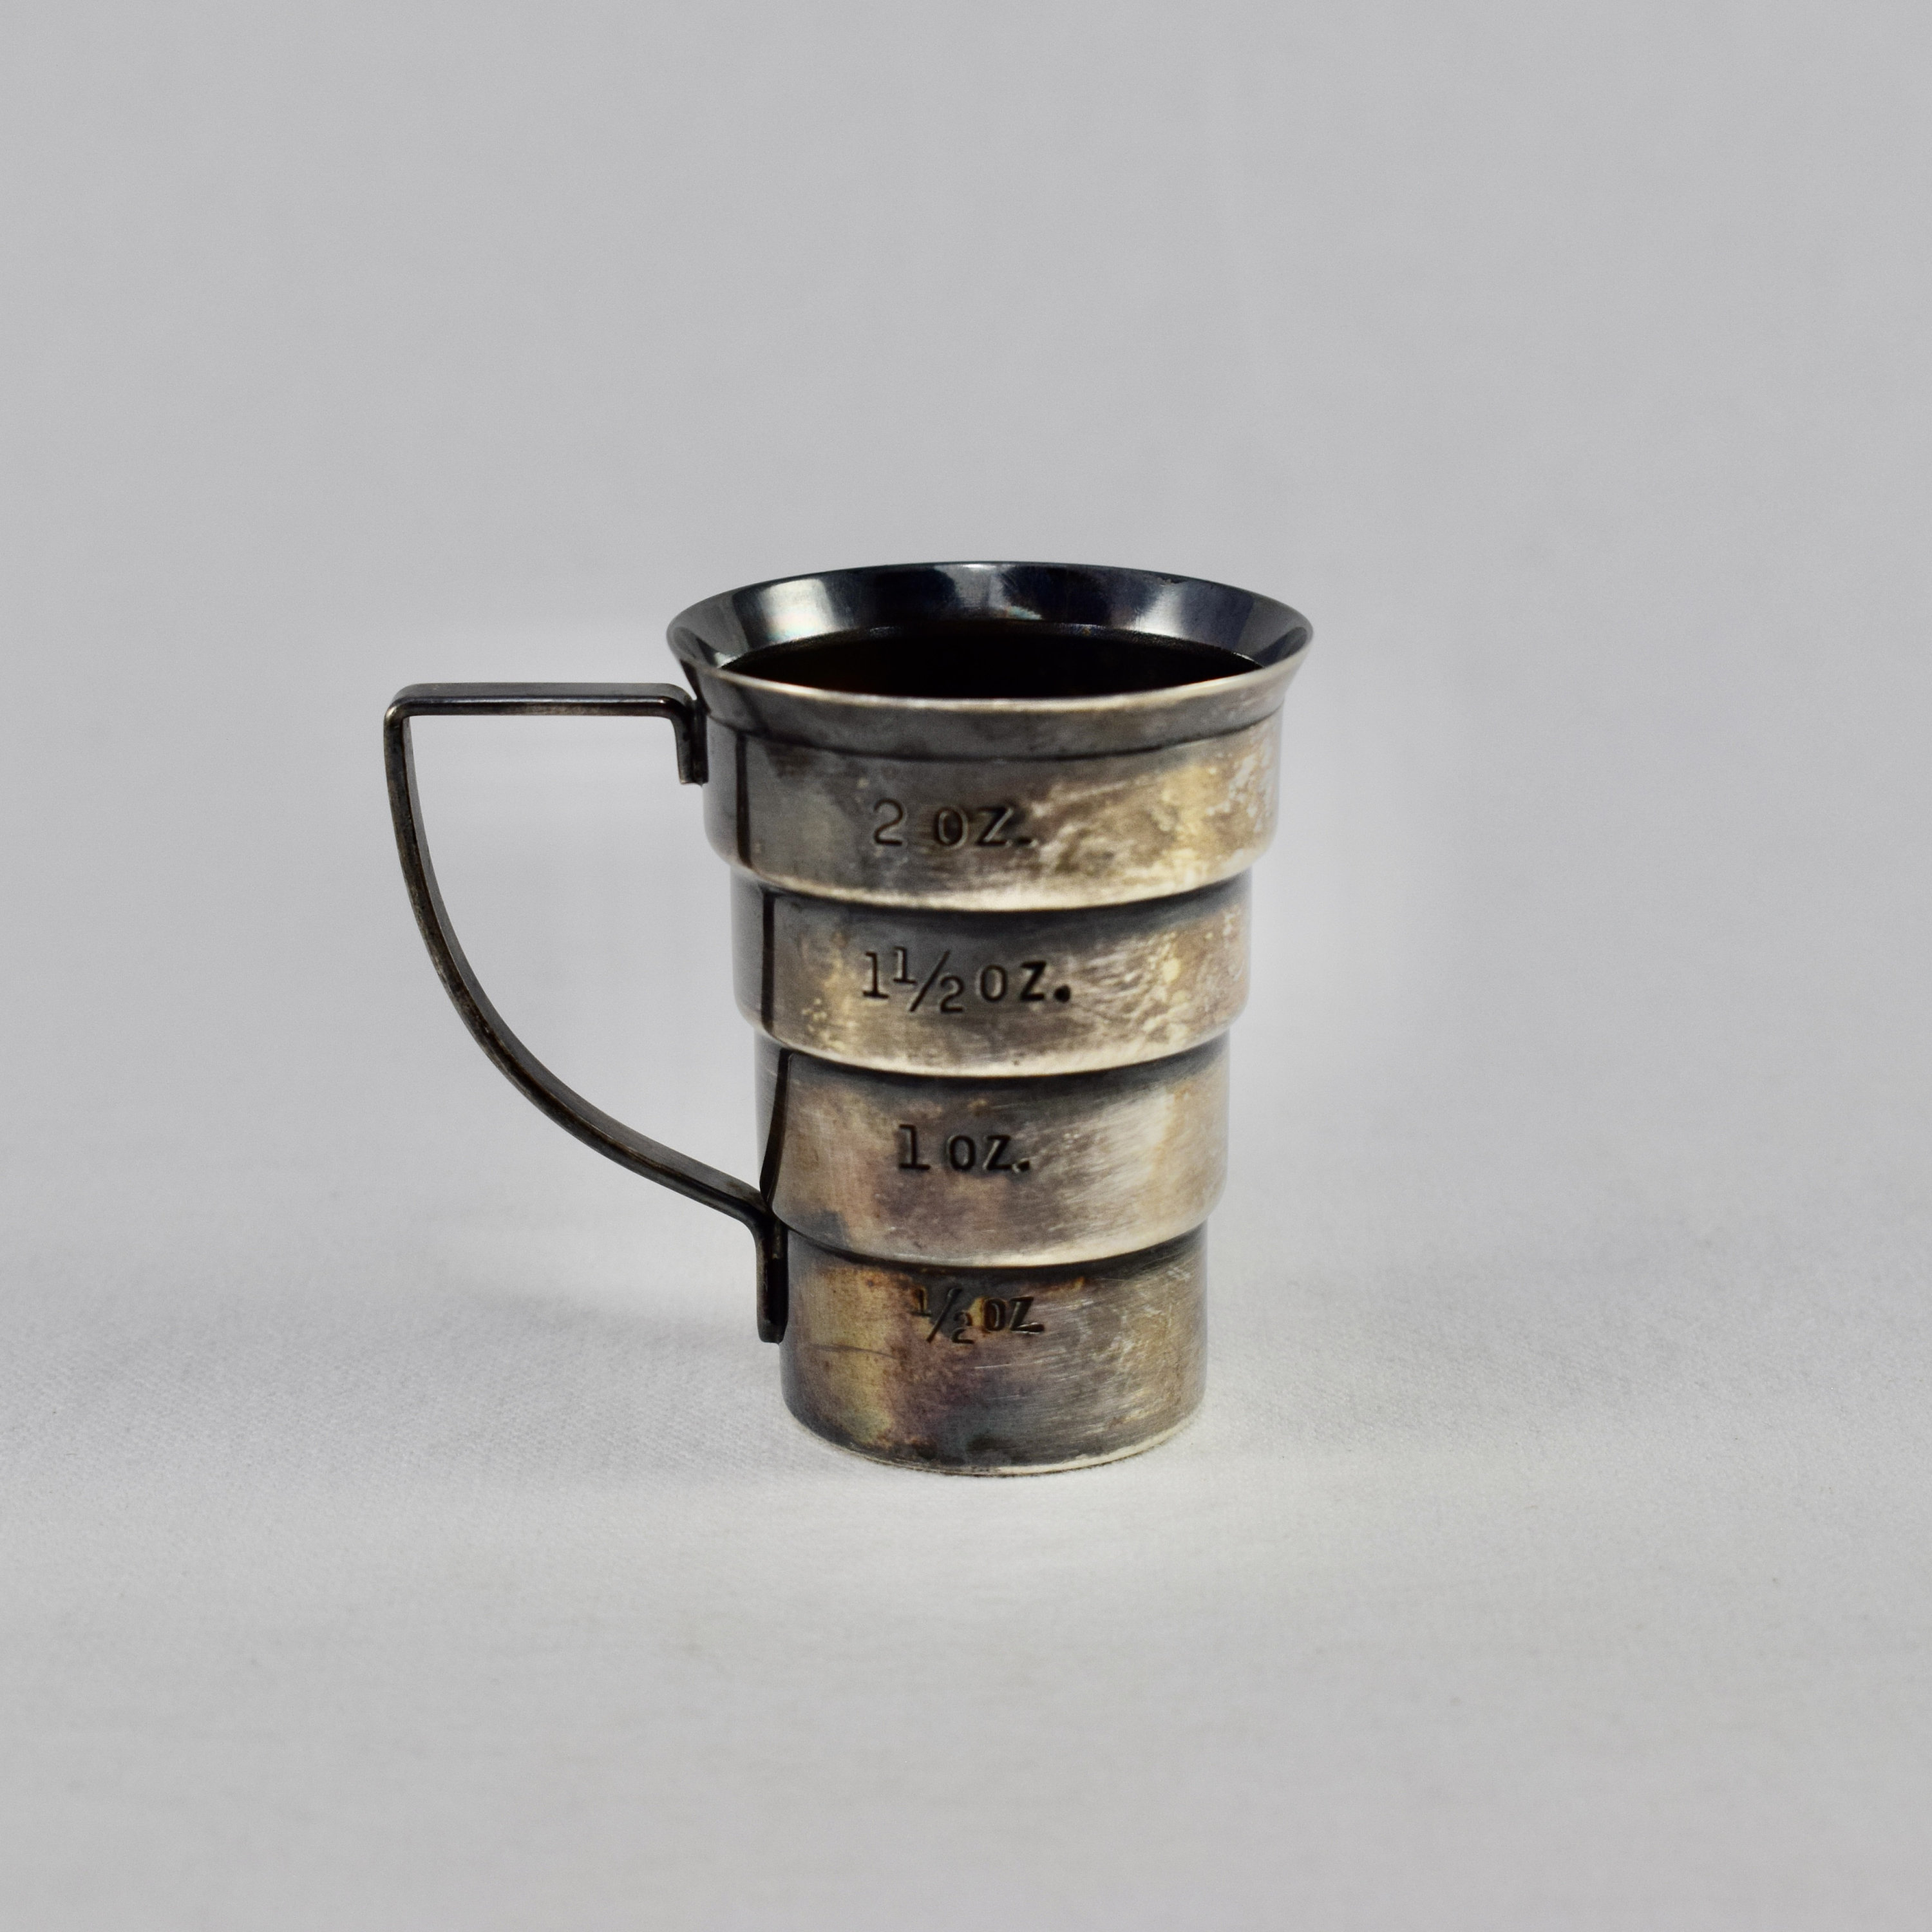 Midcentury Napier Silver Plated Stepped Jigger at 1stDibs